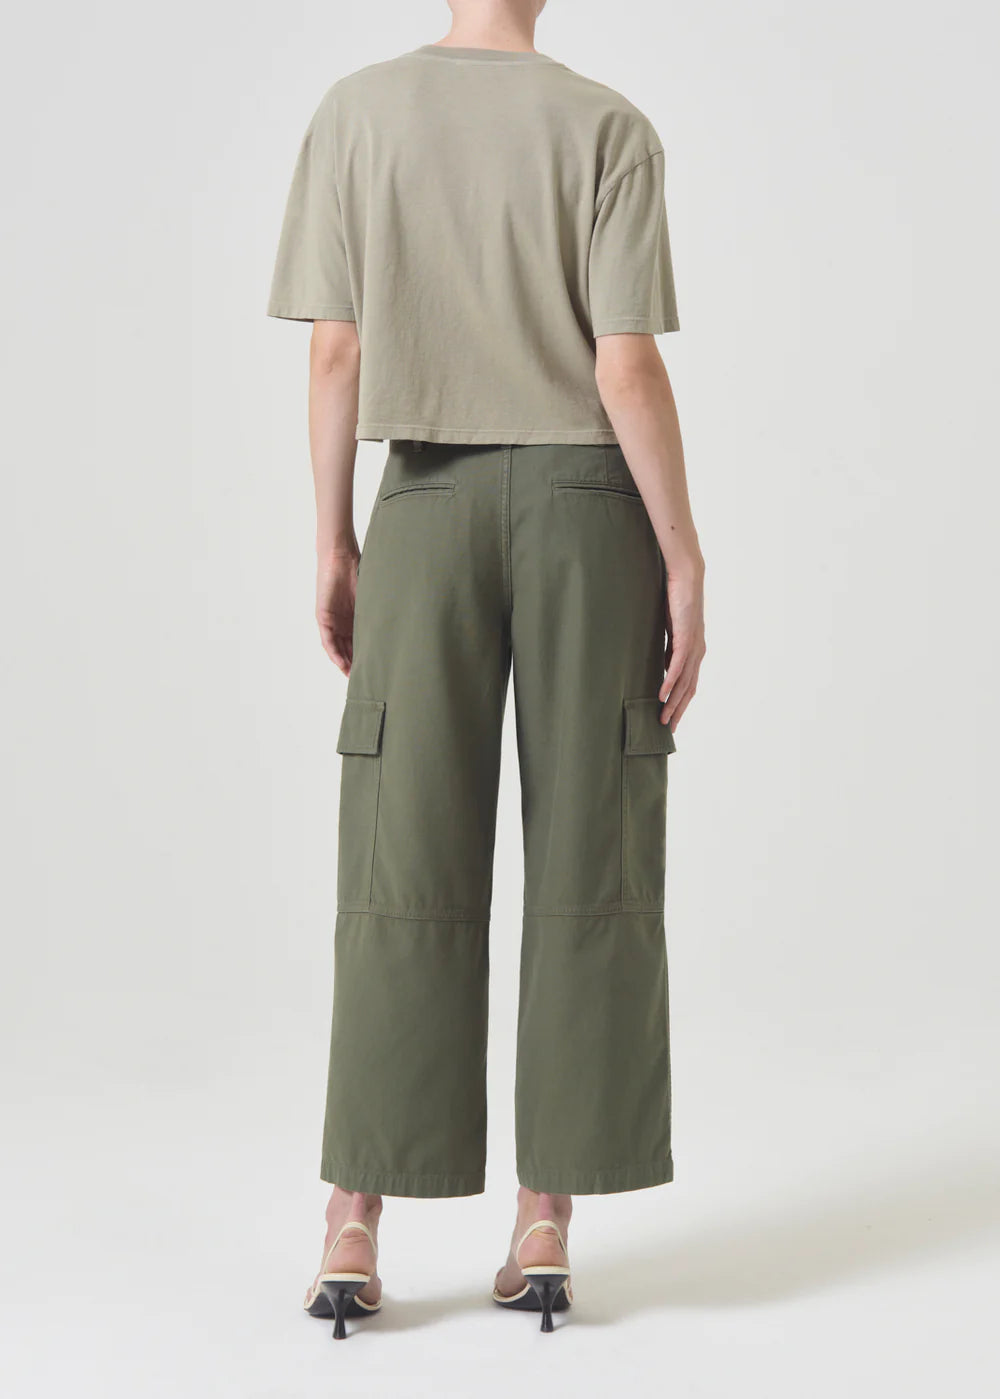 Agolde Jericho Pant in Fatigue